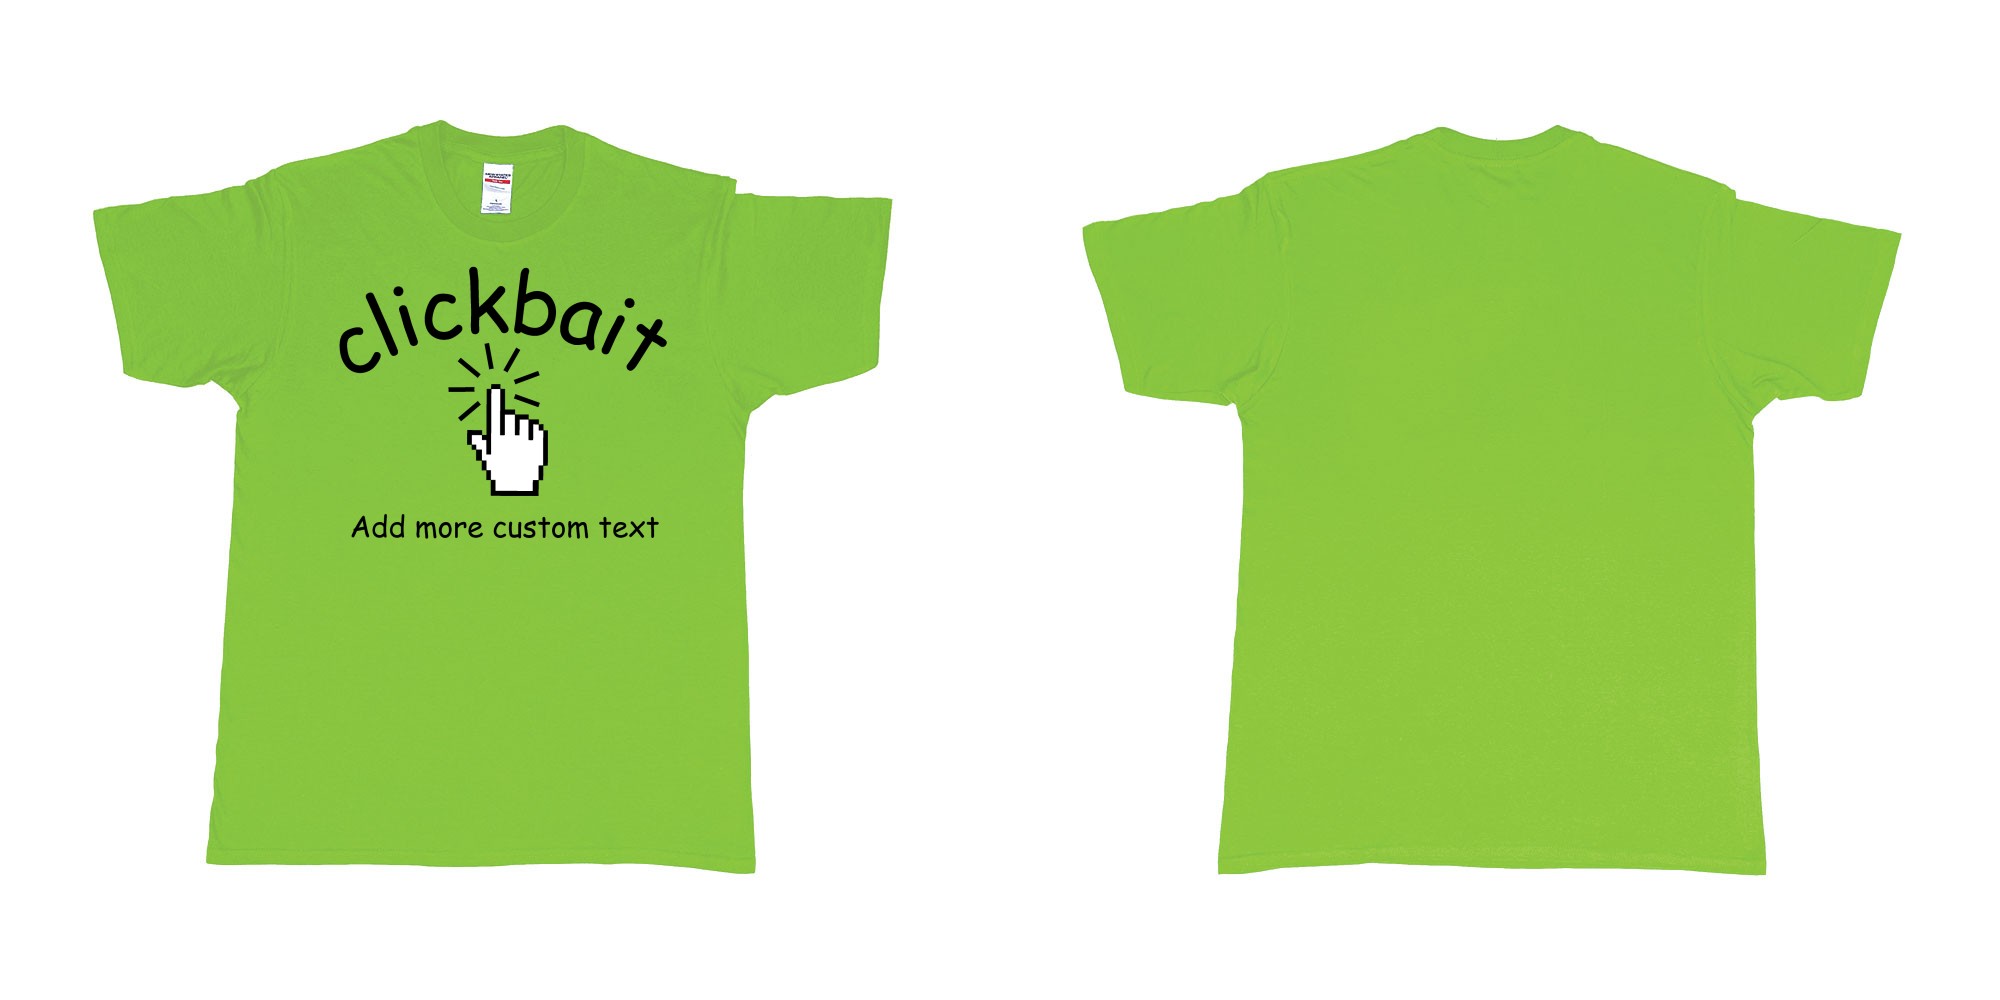 Custom tshirt design clickbait mouse click custom text tshirt printing in fabric color lime choice your own text made in Bali by The Pirate Way